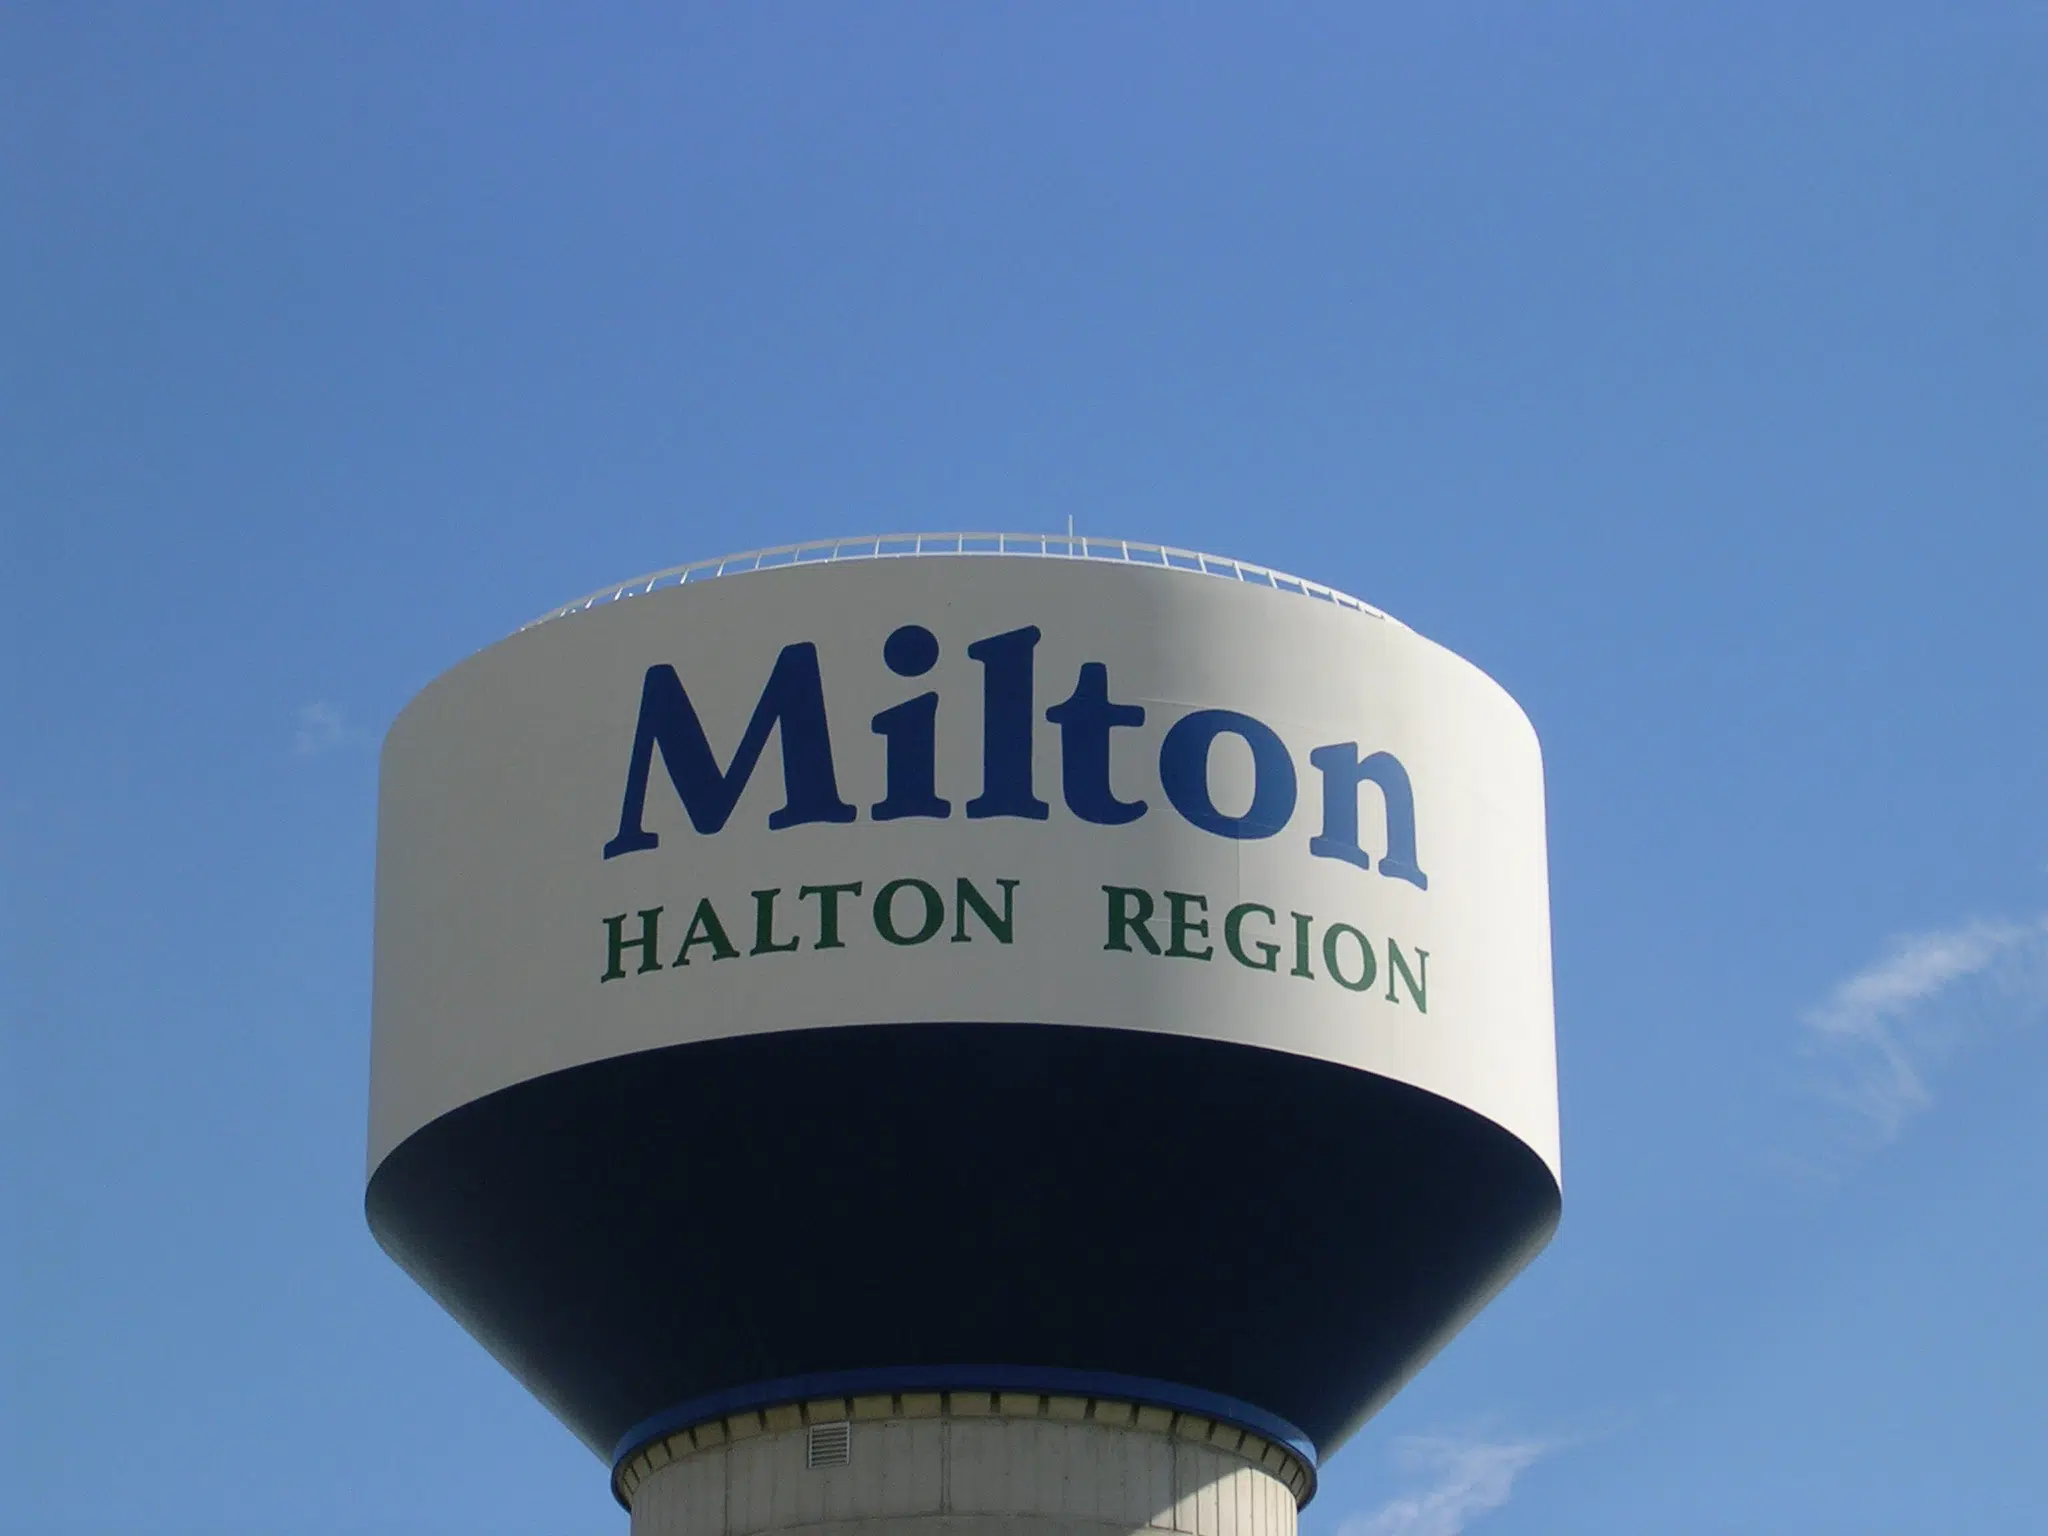 Milton One of the Youngest but One of the Most Expensive Places to Live 